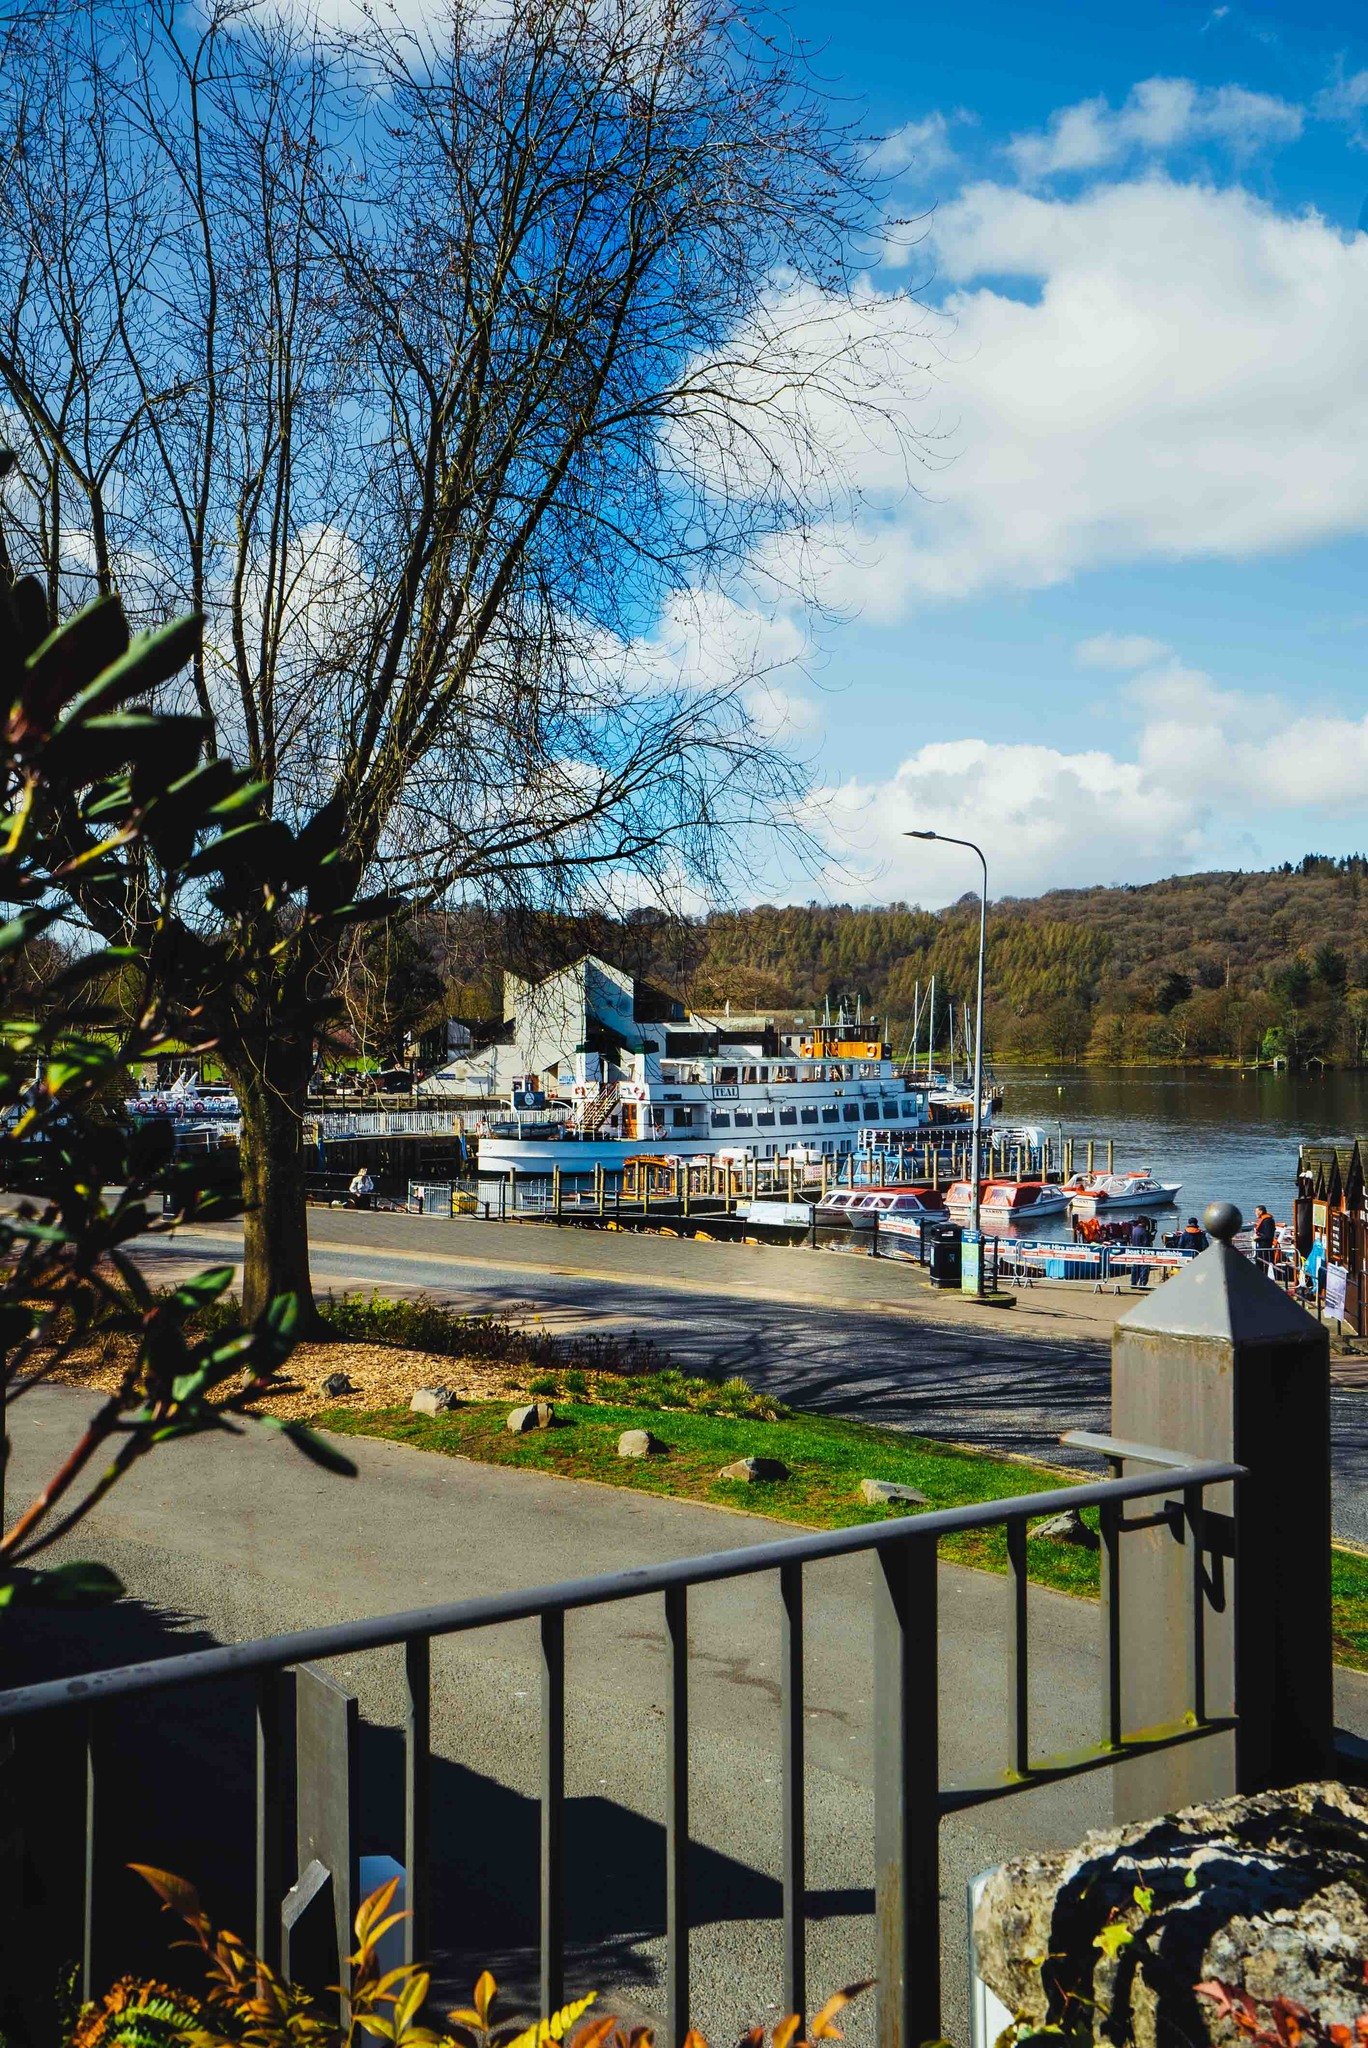 &ldquo;Lovely pub, dog friendly, great views of Windermere Lake, food was great too!&rdquo;

Thank you for your kind words! We hope to welcome you back soon! 
#LakeViewGardenBar #LiveMusic #BeautifulViews #GreatService #DeliciousFood